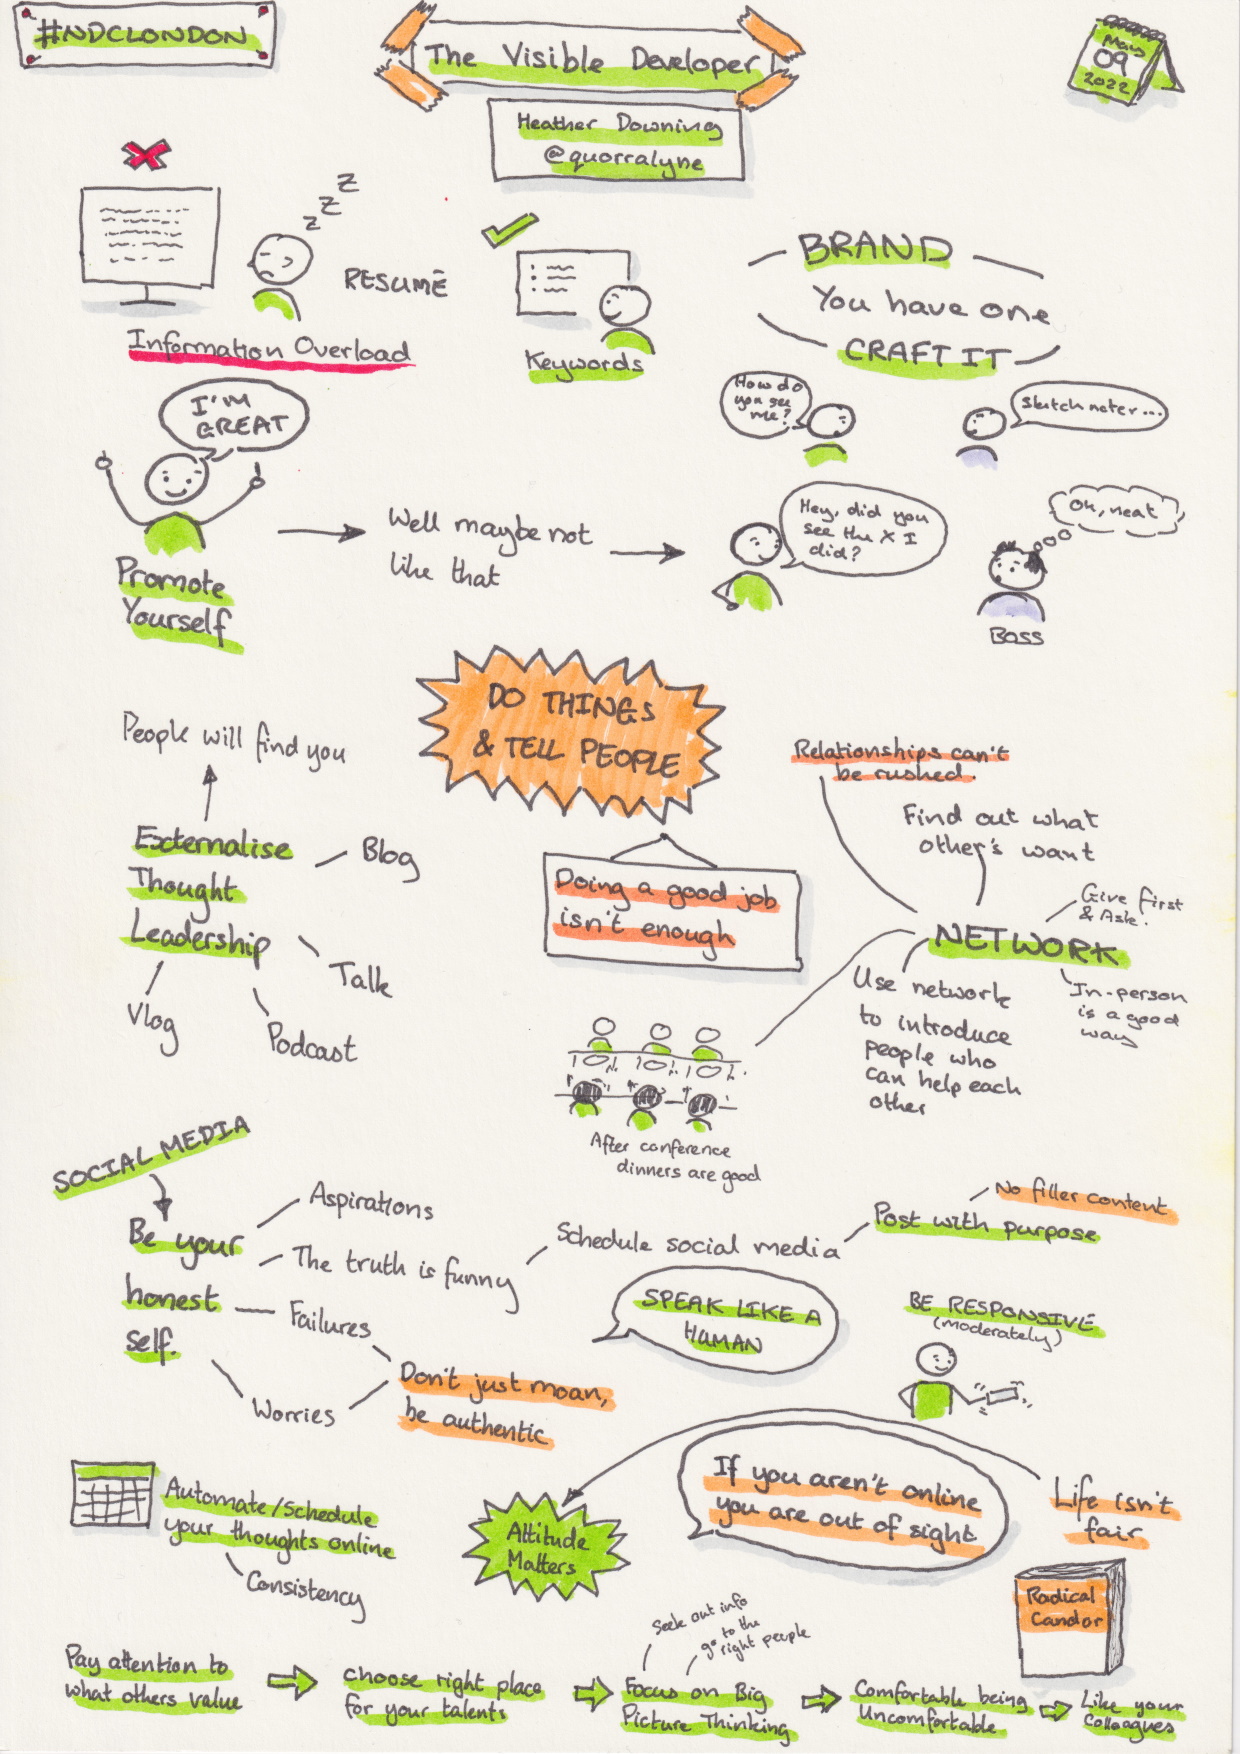 Sketchnotes from the talk 'The visible developer' by Heather Downing at NDC London 2022